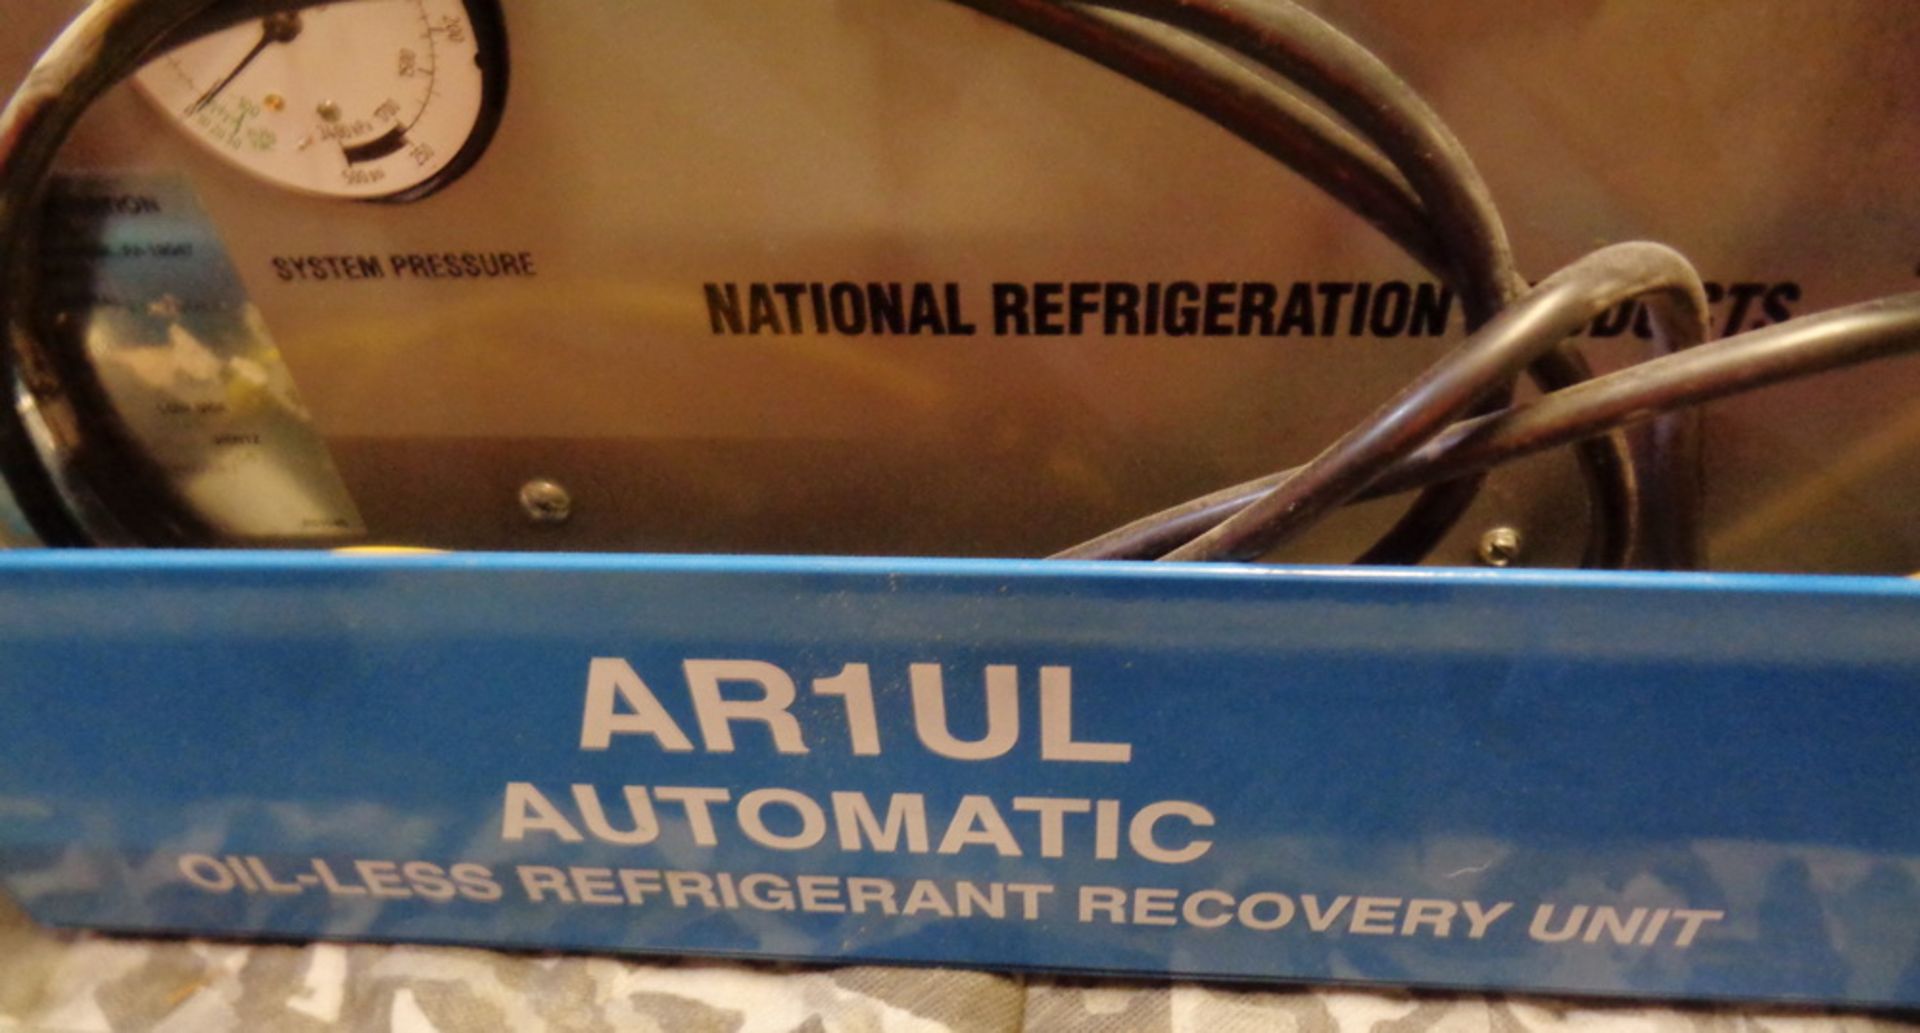 NRP GlobeSaver Series Automatic Oil less Refrigerant Recovery Unit, Model AR1UL - Image 3 of 3